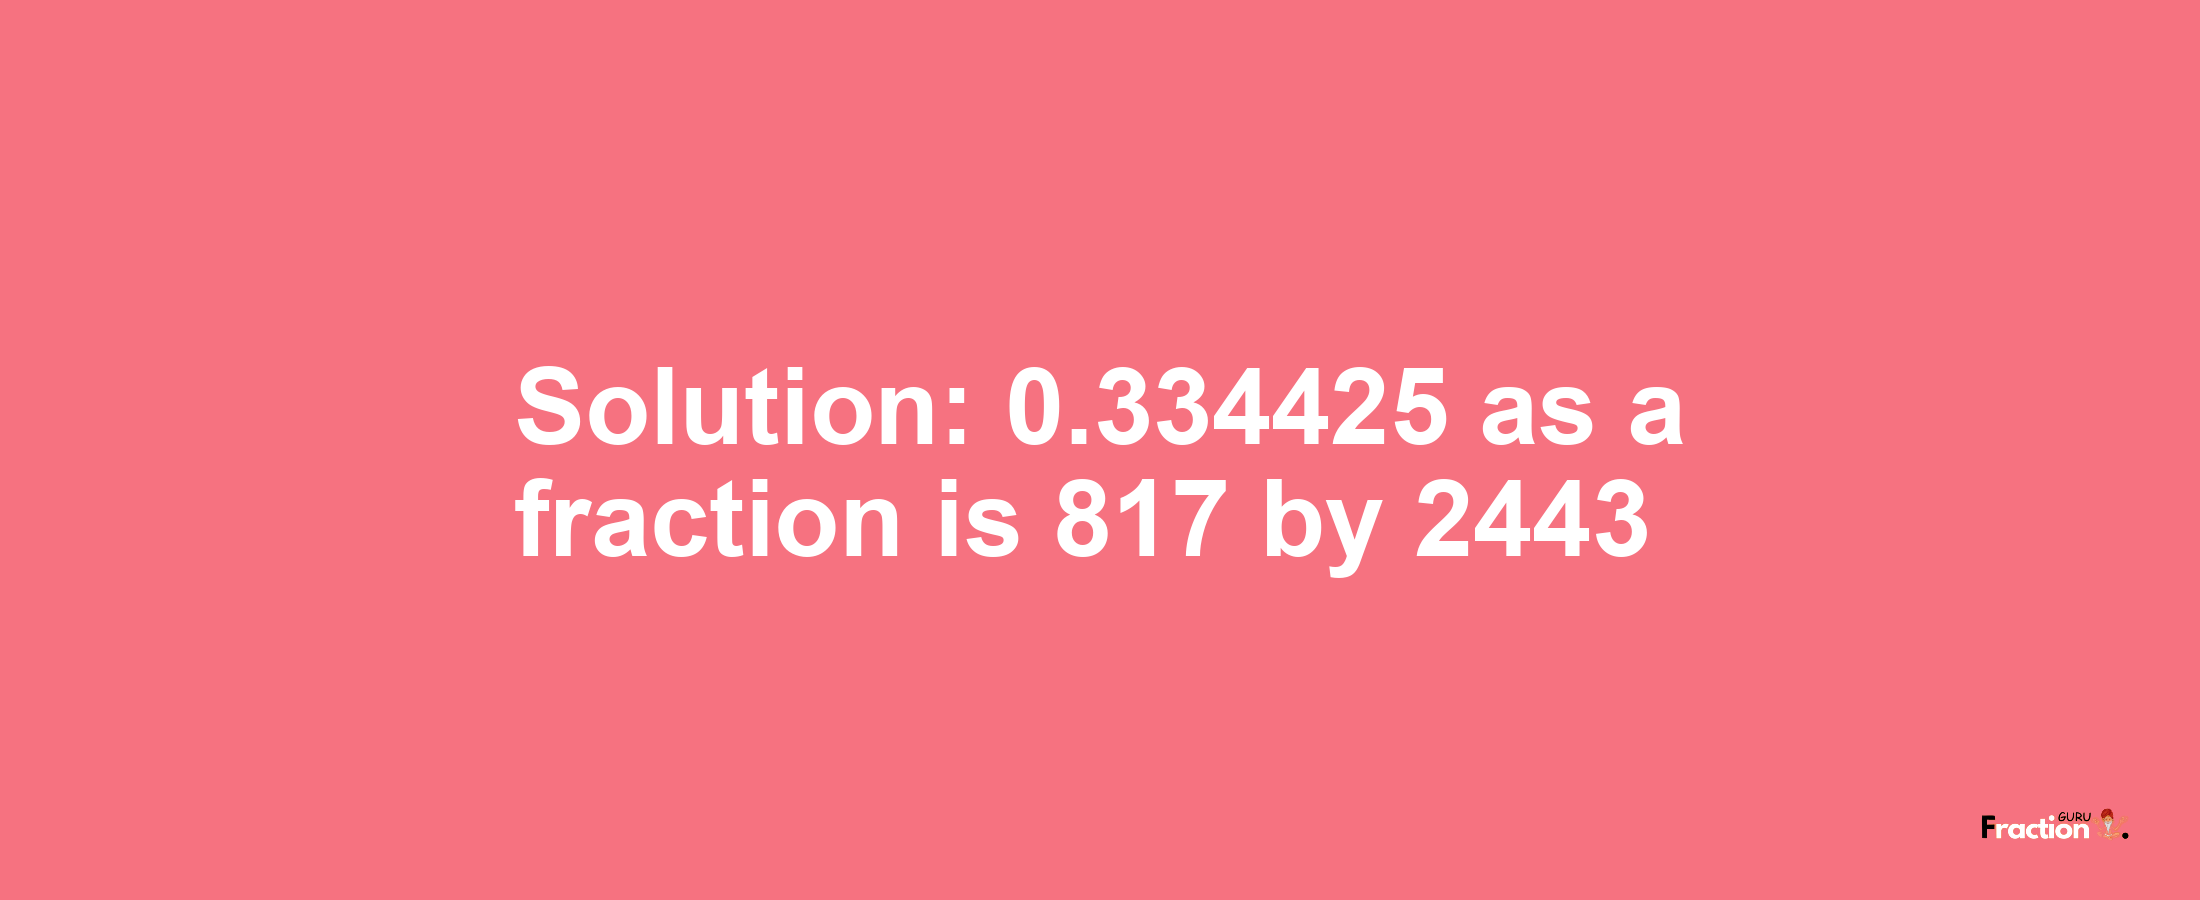 Solution:0.334425 as a fraction is 817/2443